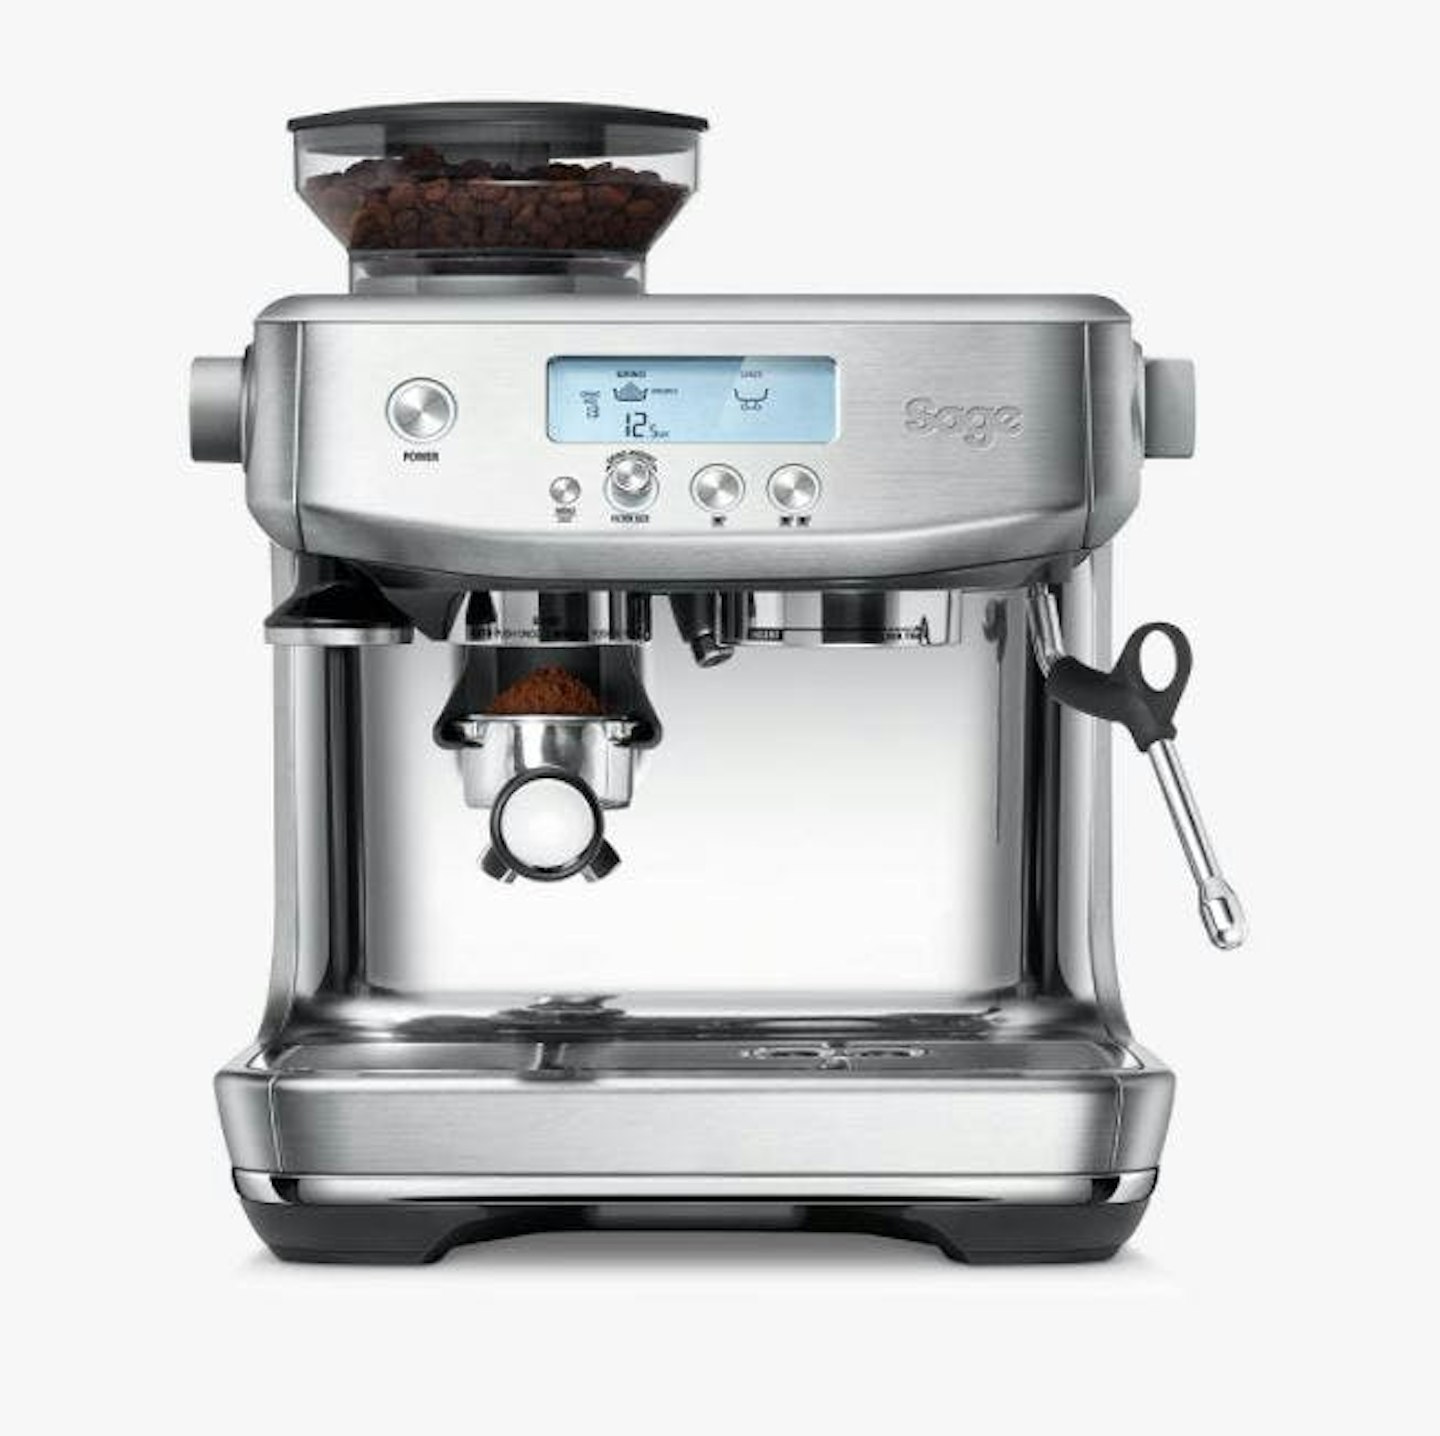 The best bean-to-cup coffee machines: Sage The Barista Pro Coffee Machine